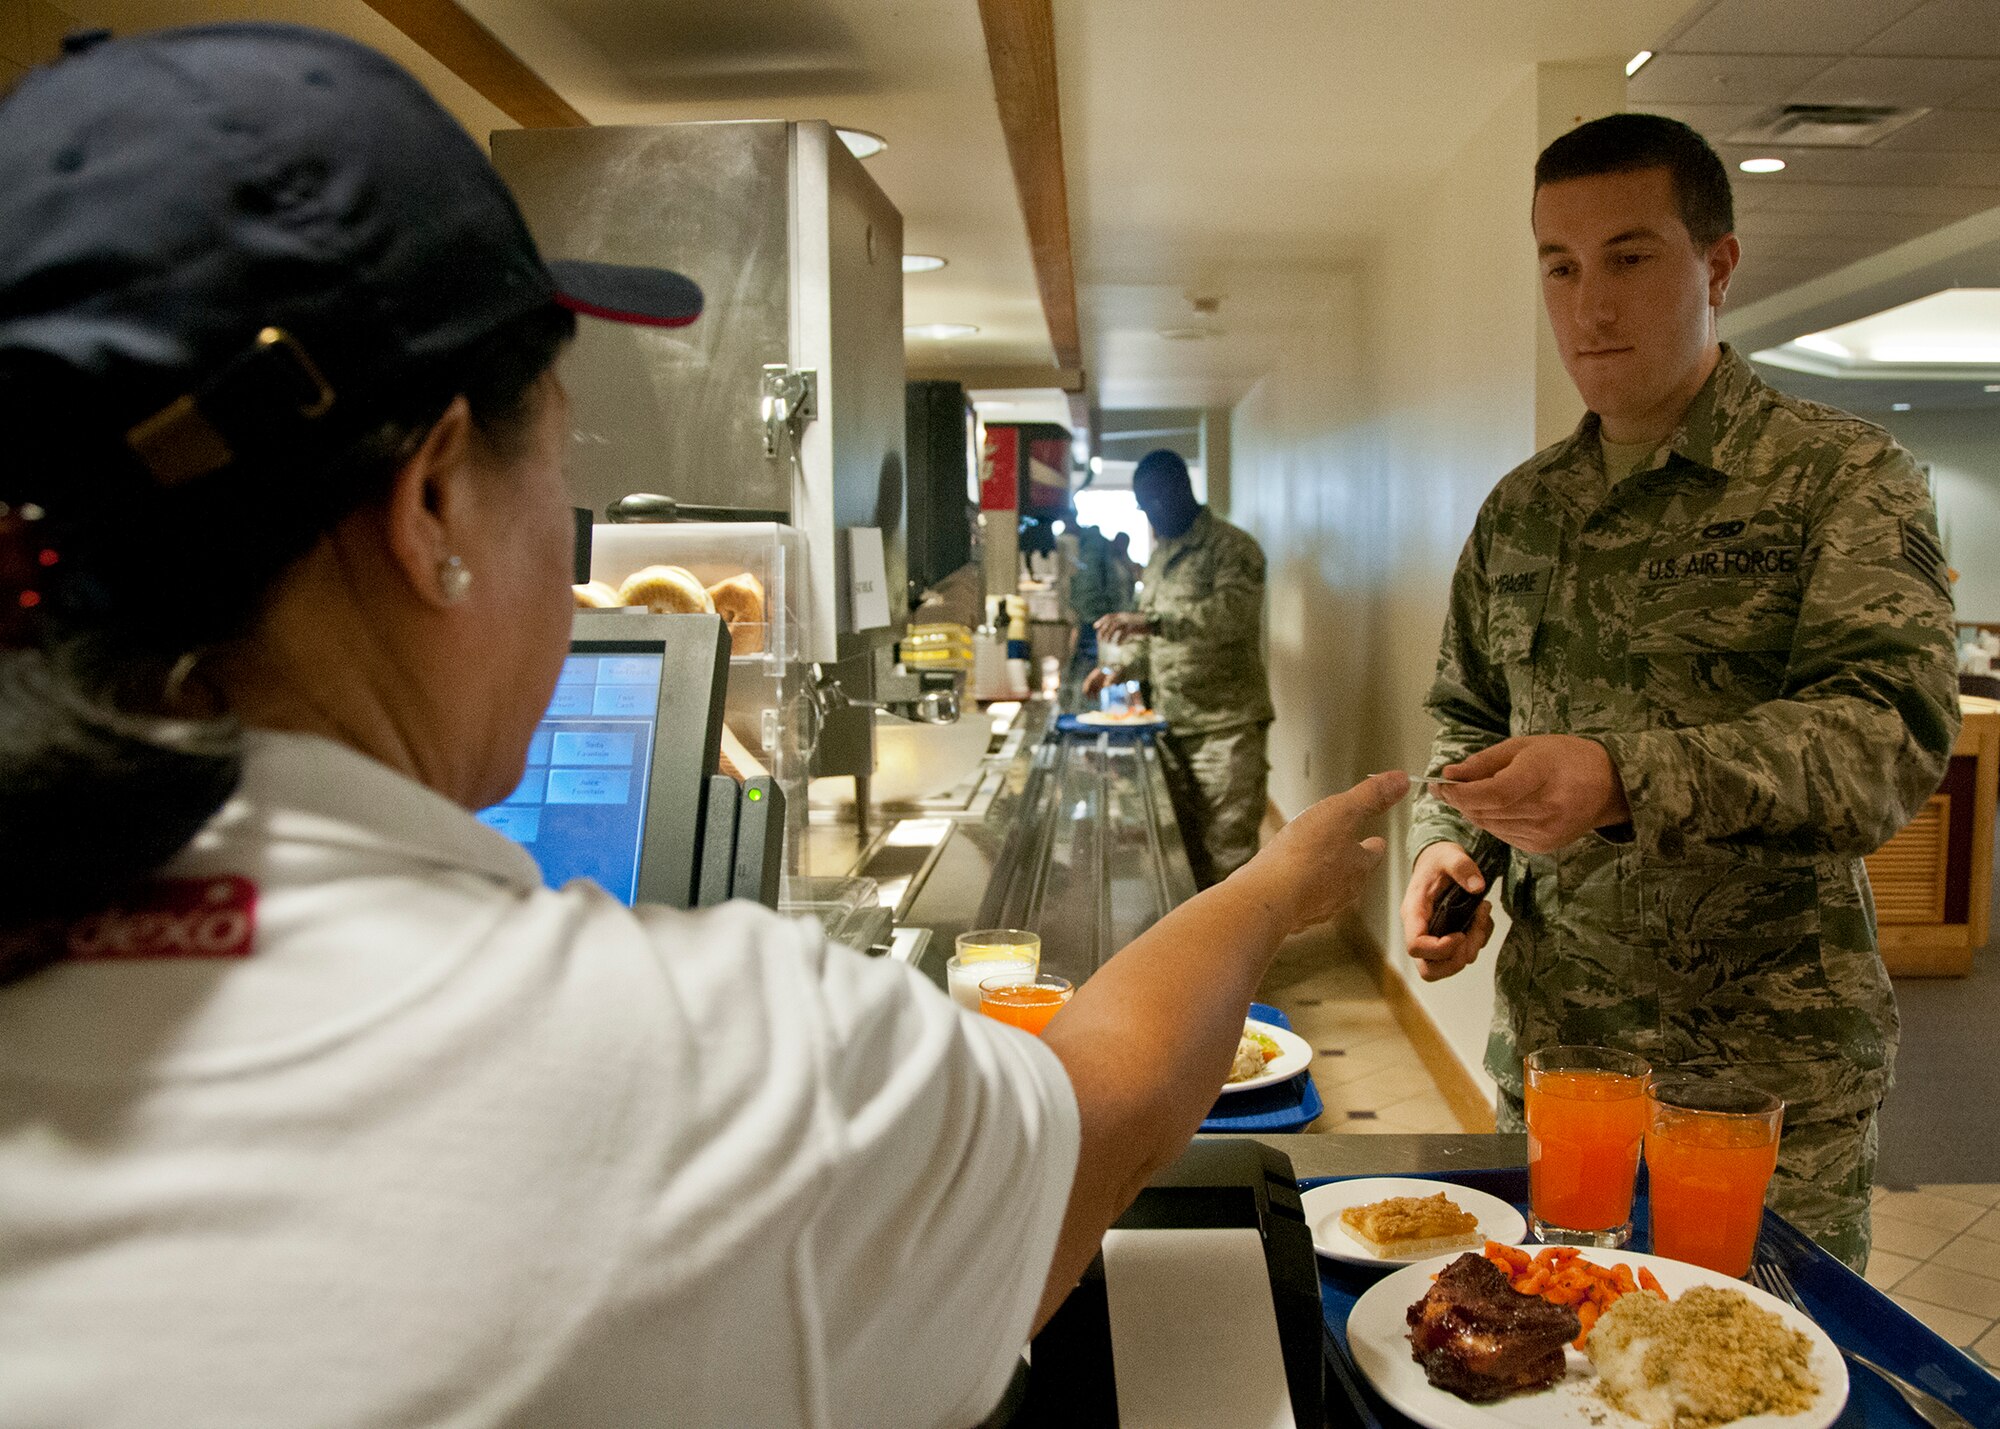 Staff Sgt. Kyle Champagne hands over his ID card for scanning before eating at the Duke Field dining facility.  A new contractor, Sodexo, brought about changes to the way Airmen pay for meals during the unit training assembly and the order in which they are served.  (U.S. Air Force photo/Tech. Sgt. Sam King)